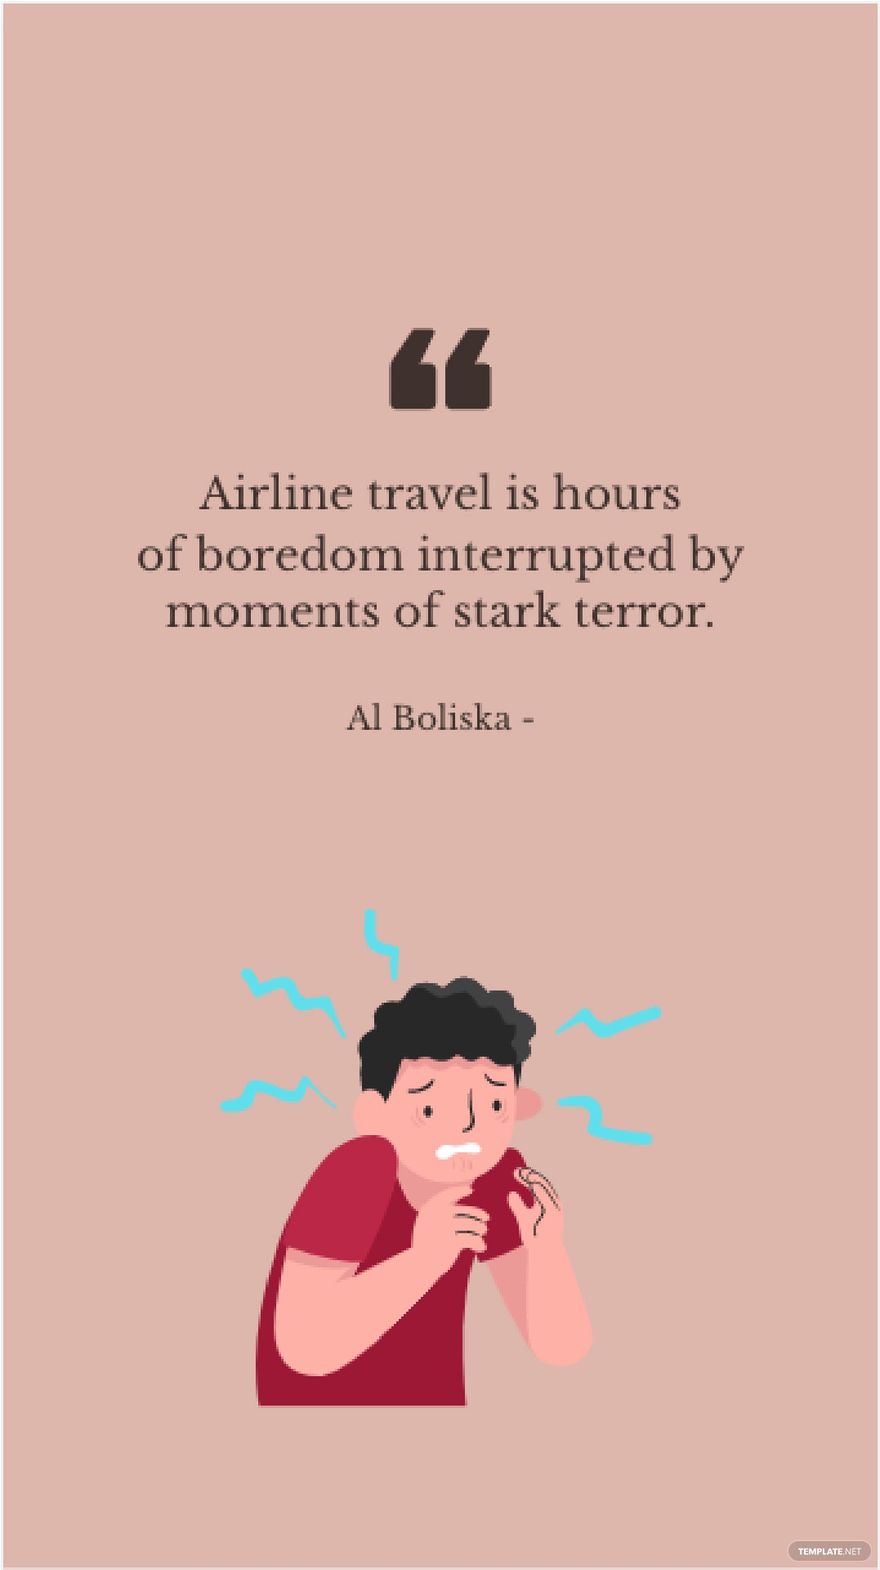 Al Boliska - Airline travel is hours of boredom interrupted by moments of stark terror.